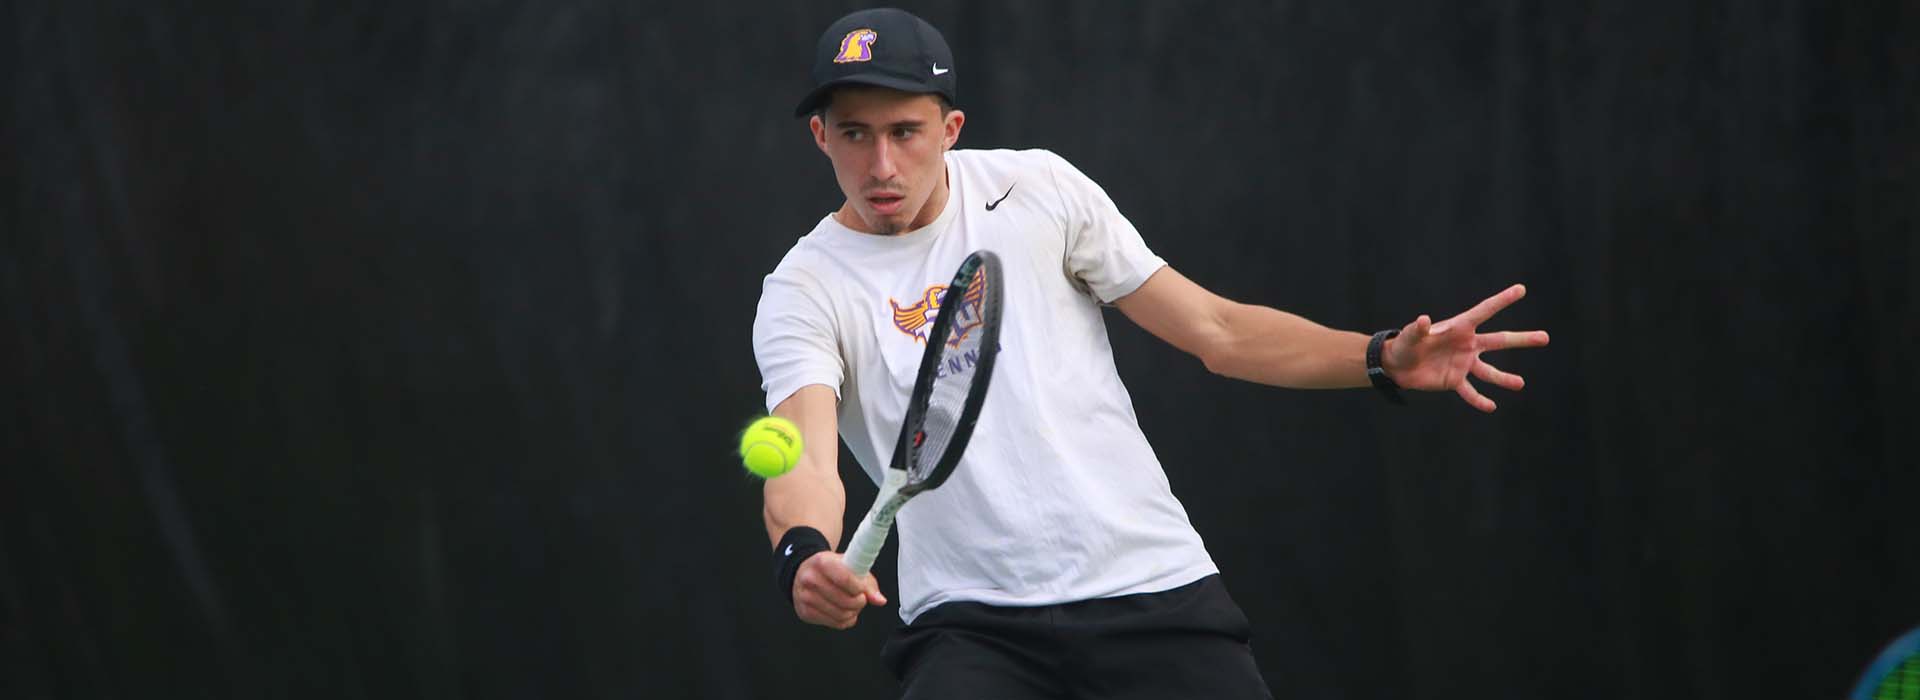 Tech tennis takes aim in first fall tournament of the year with trip to UNCG Fall Invitational